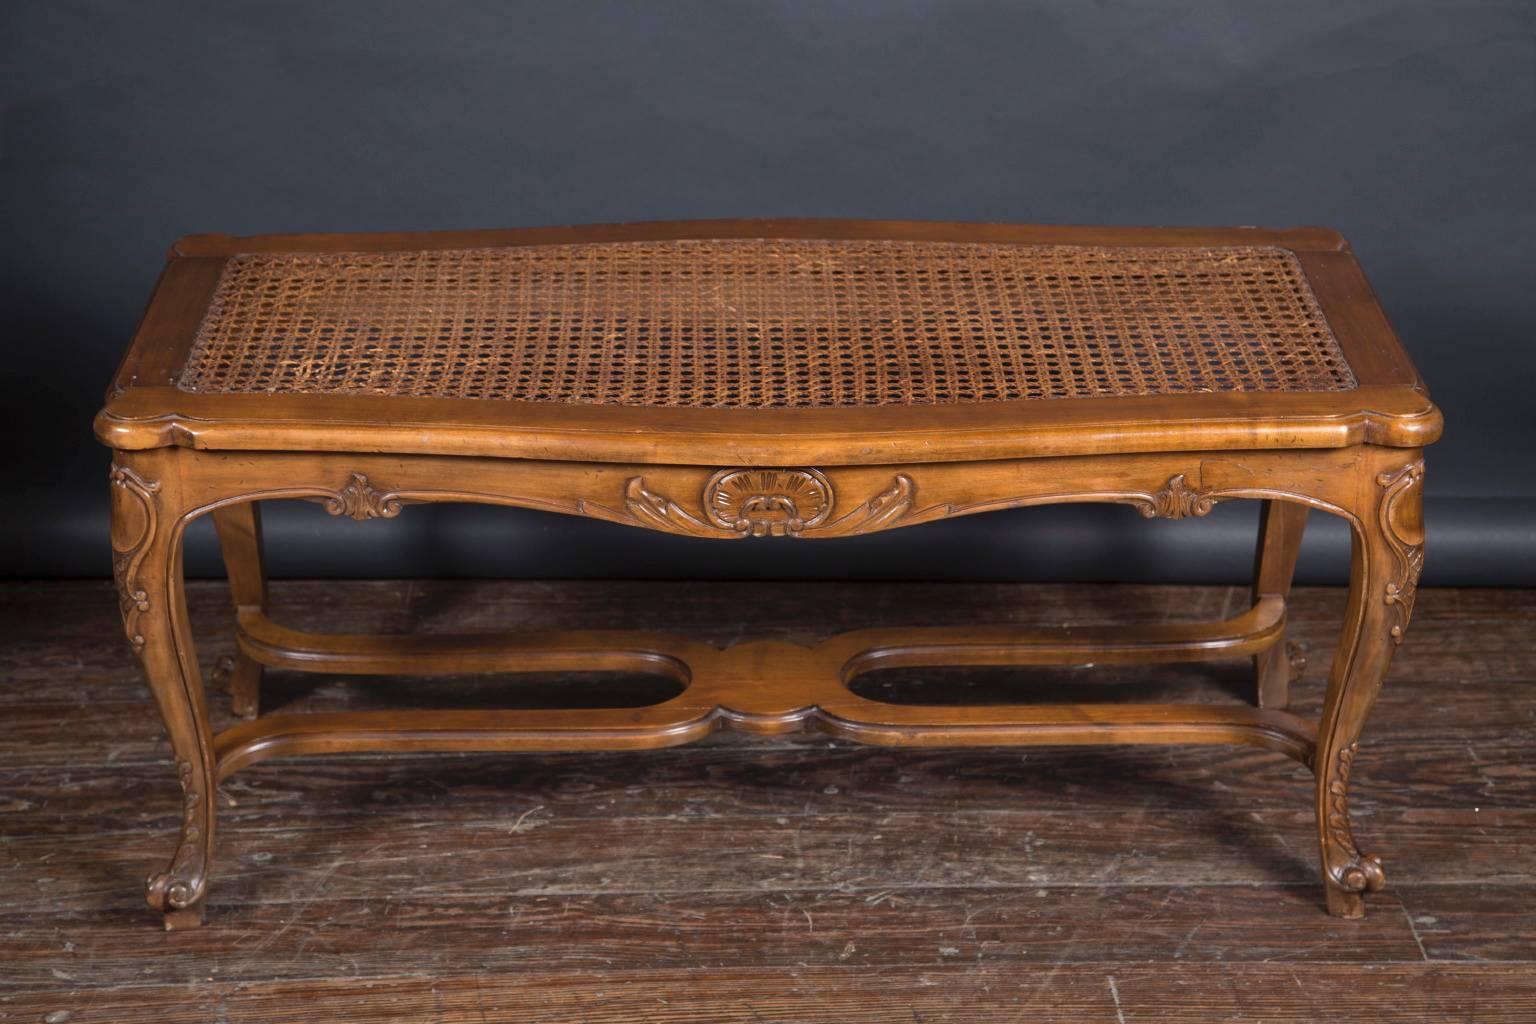 Made of a walnut frame with a caned seating area, this walnut bench has cabriole legs with scroll feet separated by a stretcher. Beautiful designs are carved into the wood of the bench along the sides and legs. The French piece dates back to the mid